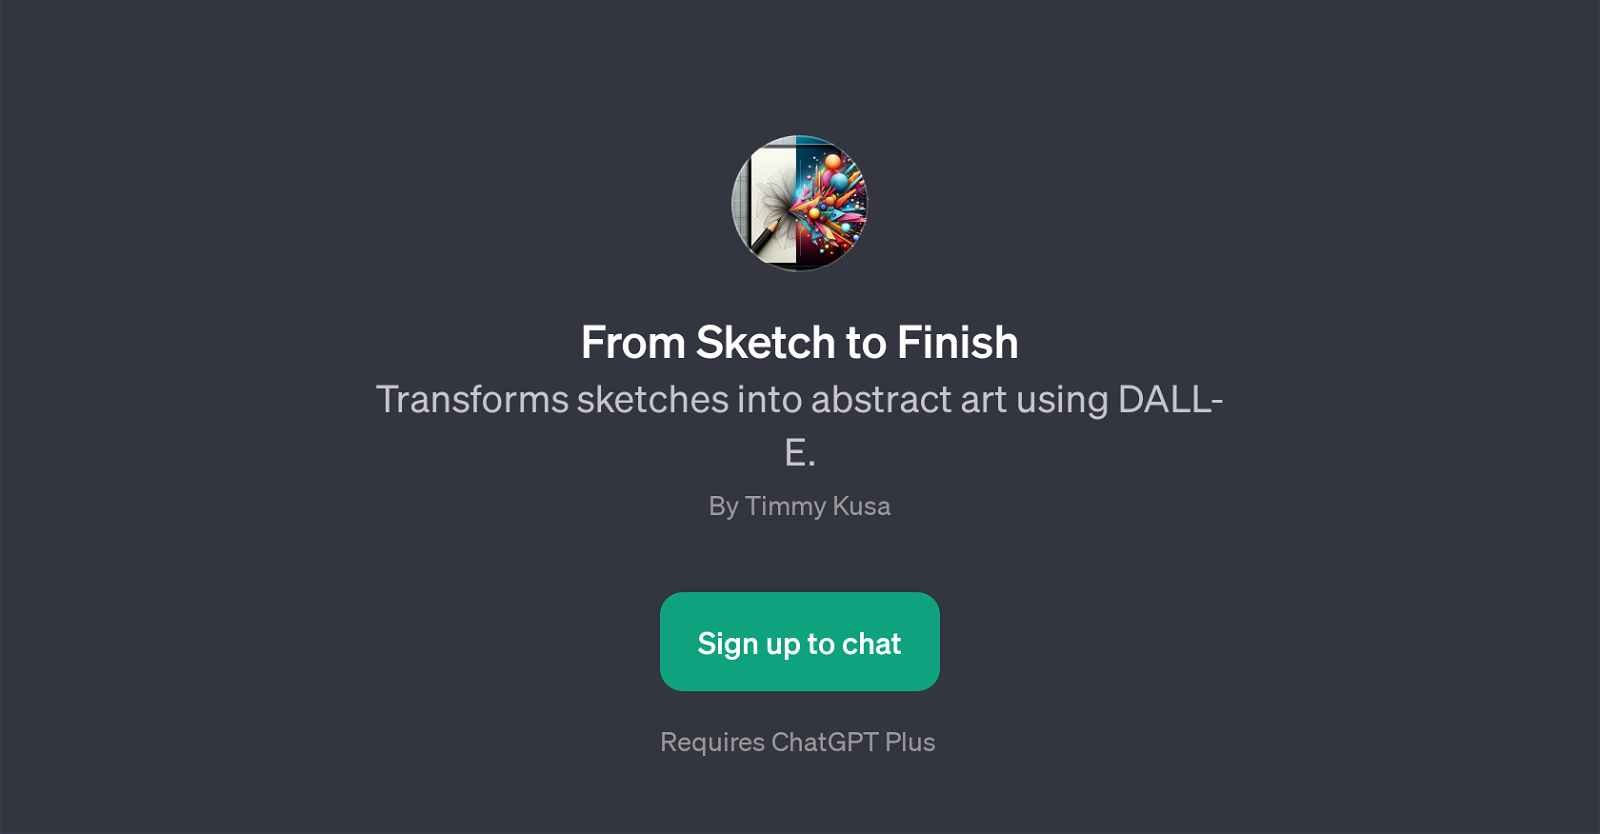 From Sketch to Finish website